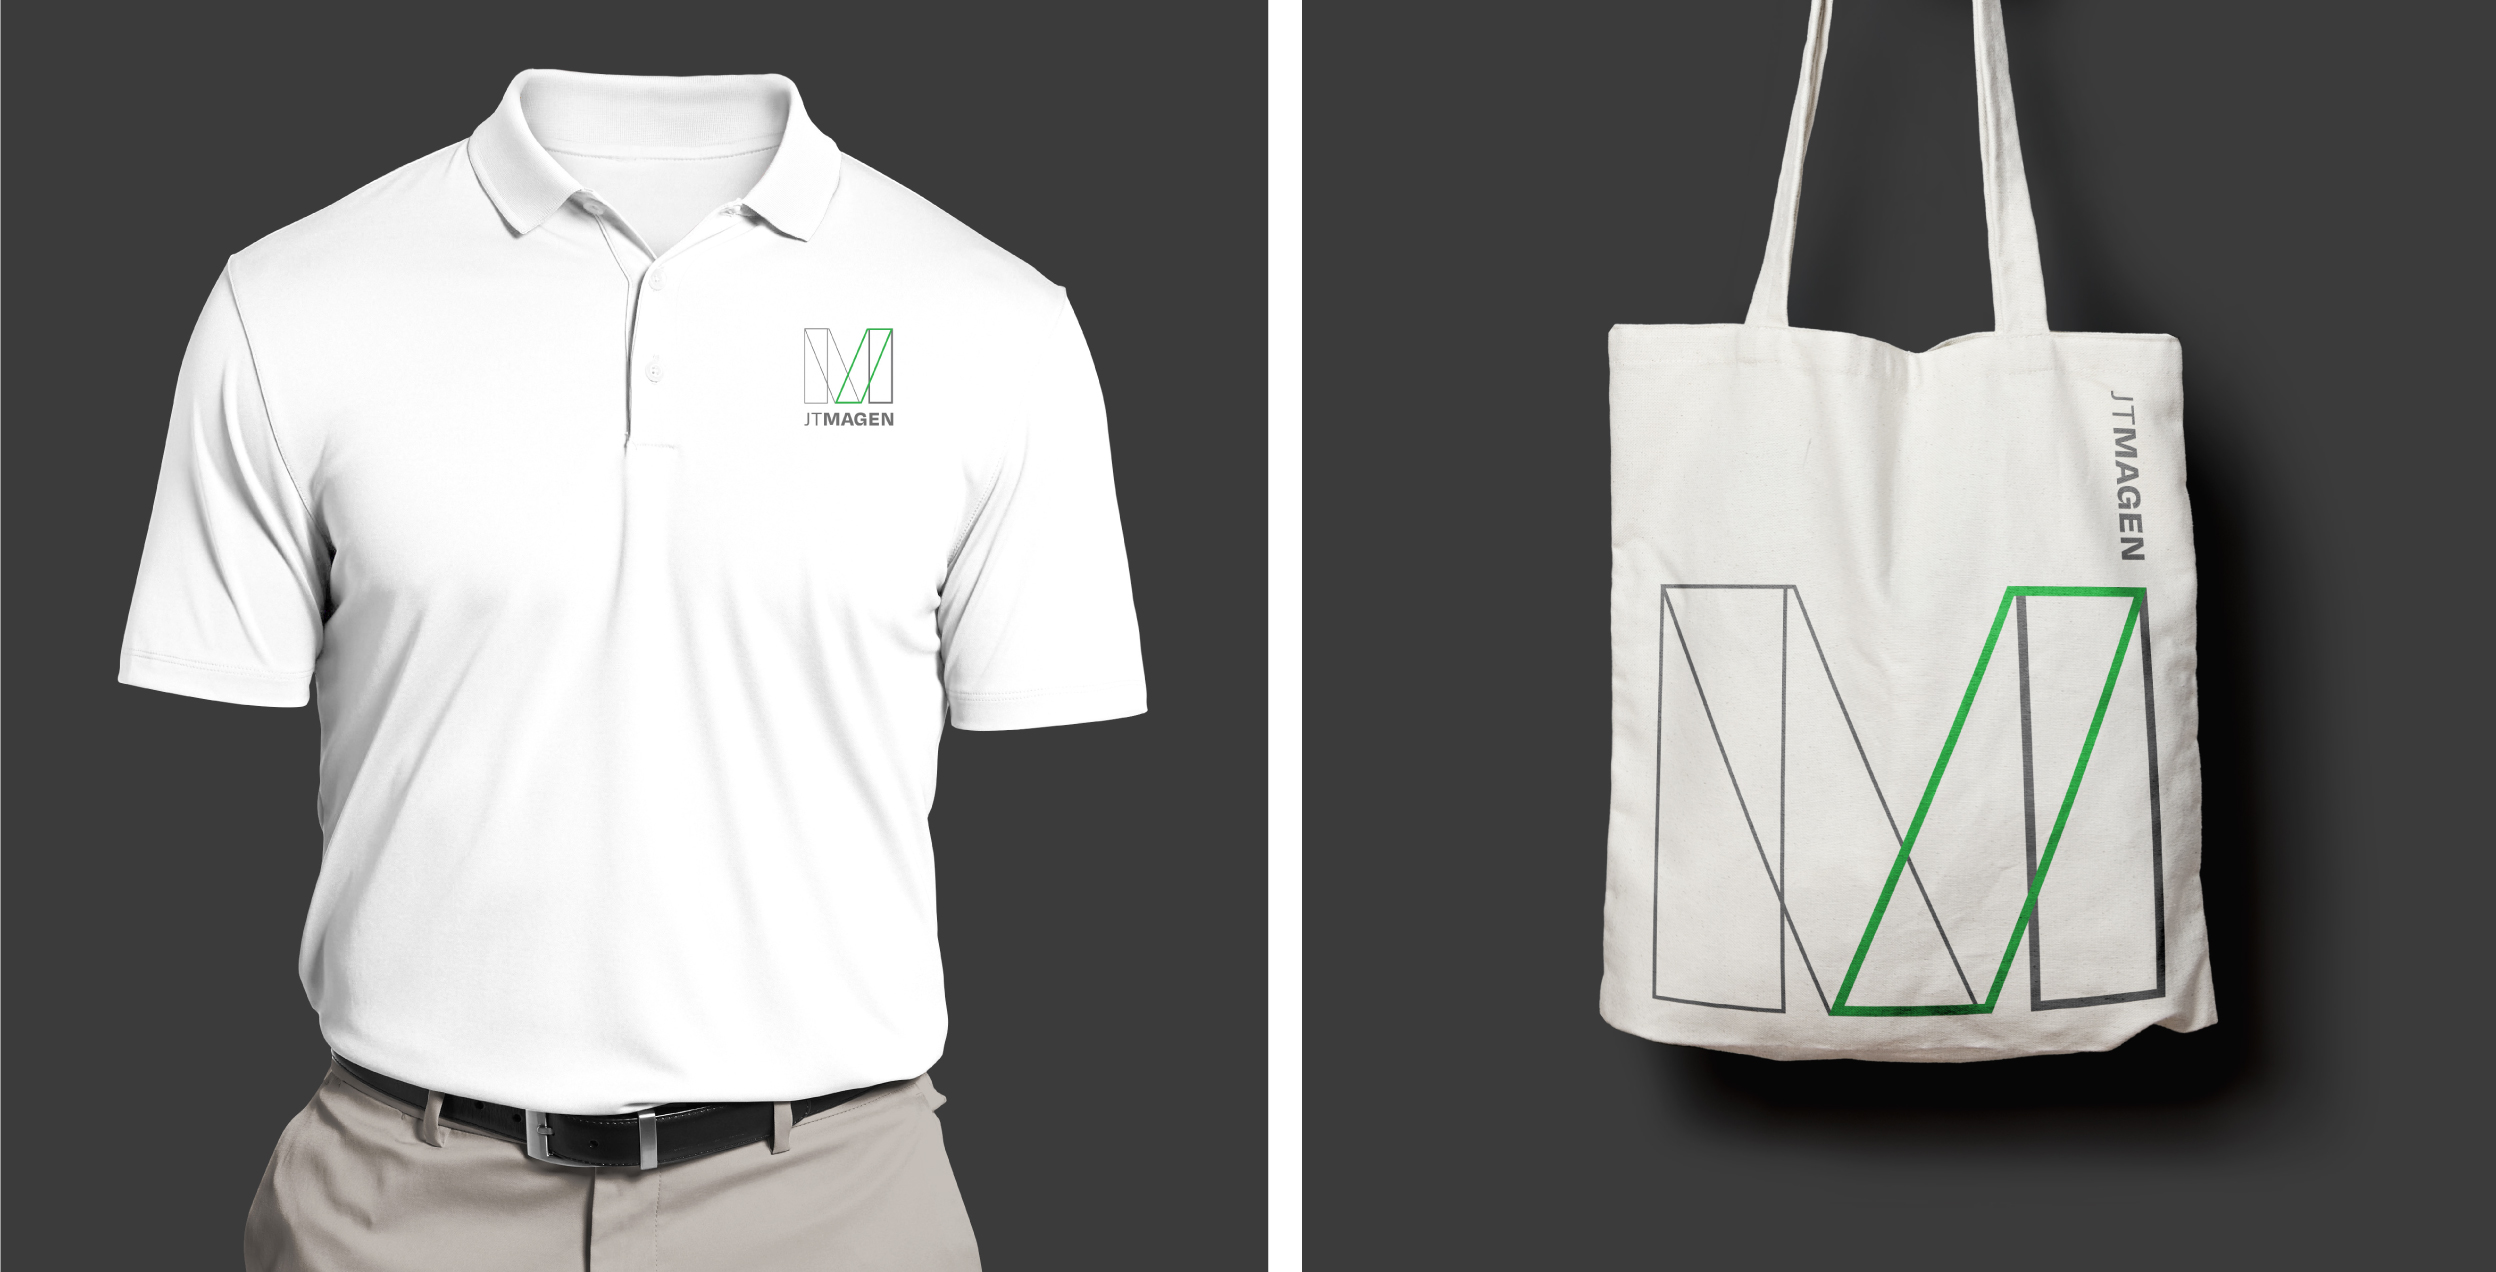 magen tshirt design and tote bag with the logo on each